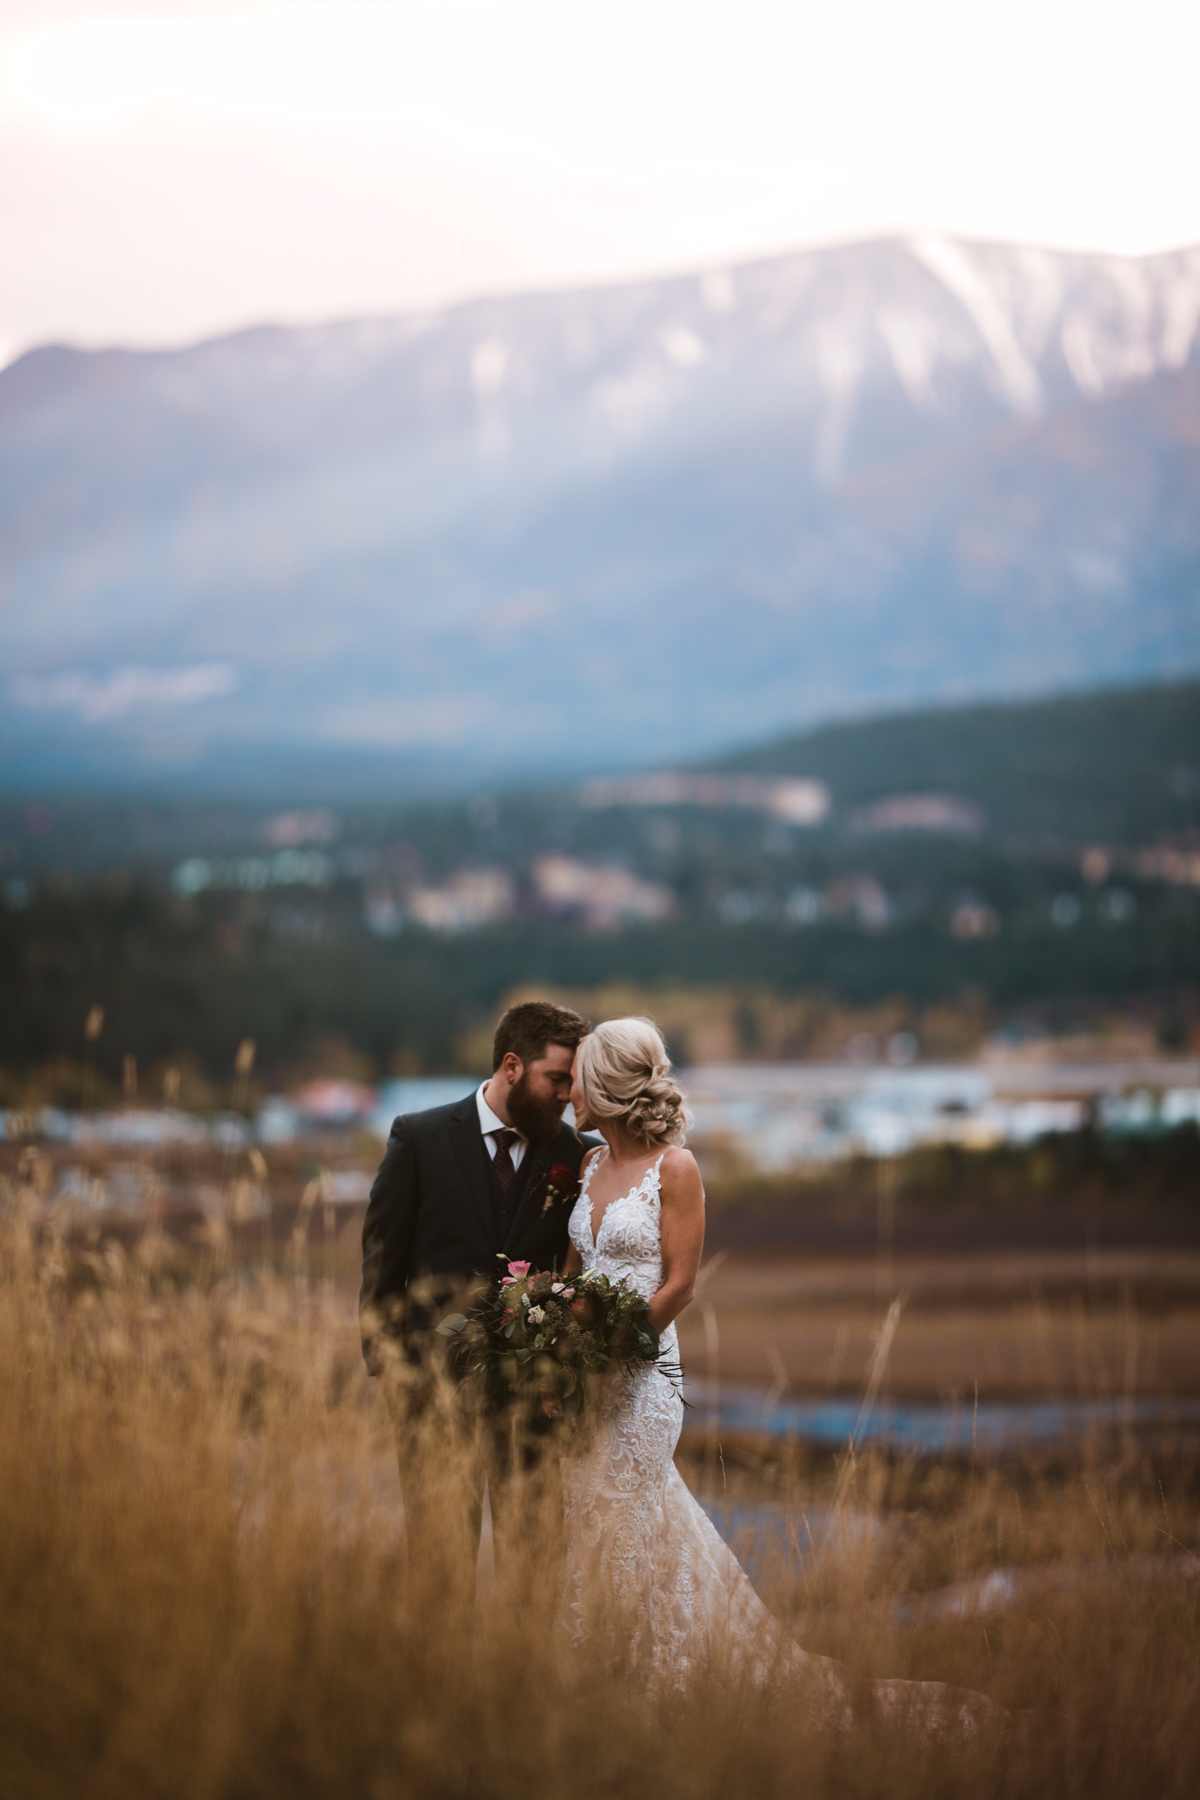 Calgary wedding photographer in Invermere for adventurous mountain destination elopement at Eagle Ranch Golf Resort, British Columbia - Image 39